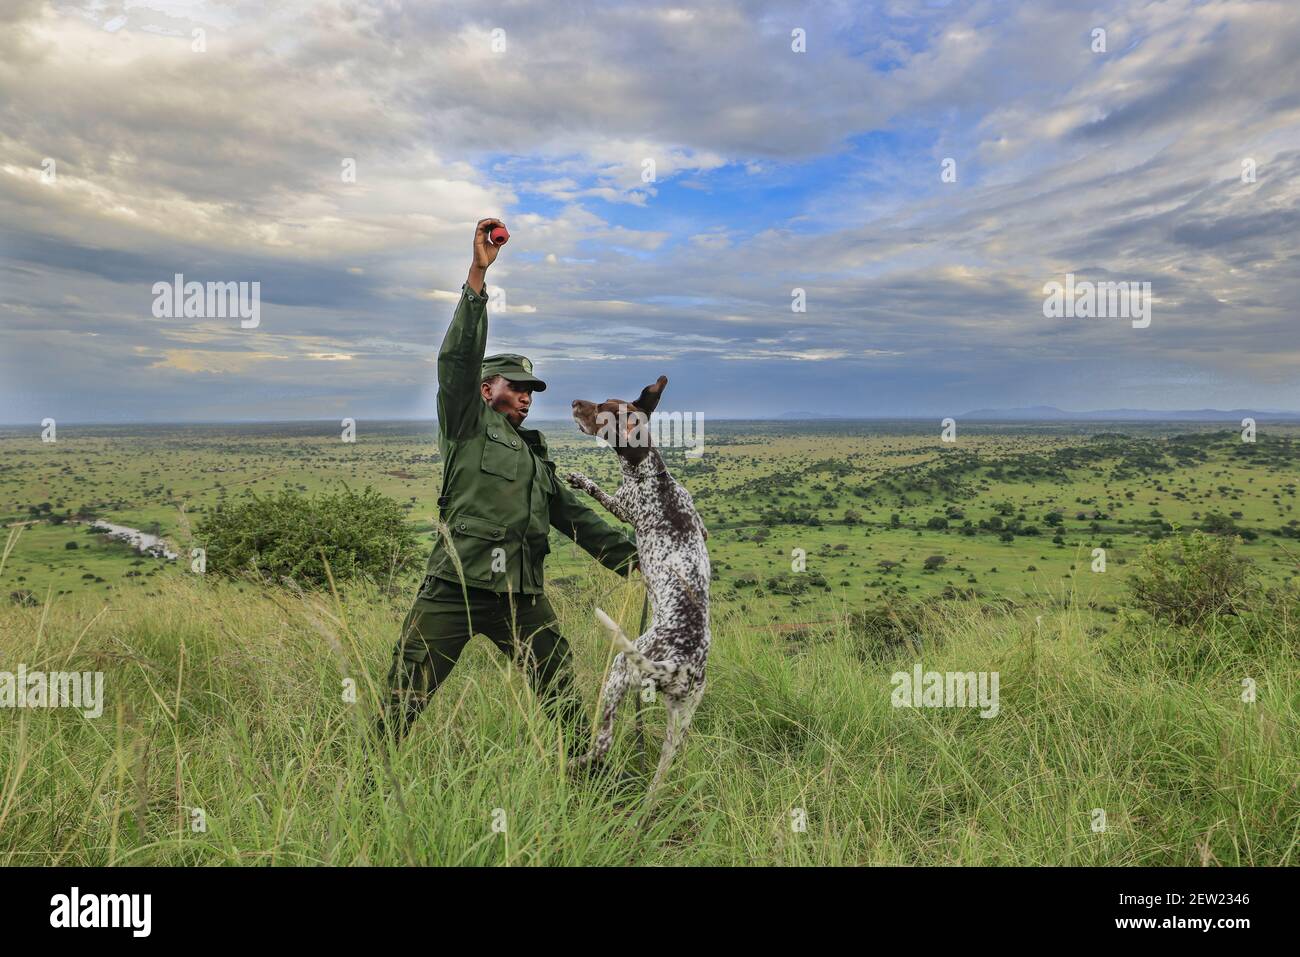 Tanzania, Serengeti National Park, Ikoma, The K9 unit is out, and Oscar and his dog handler Jamali take the opportunity to do some exercises, Oscar must grab the reward stick, which he prefers to any other reward, an opportunity for play and physical training Stock Photo